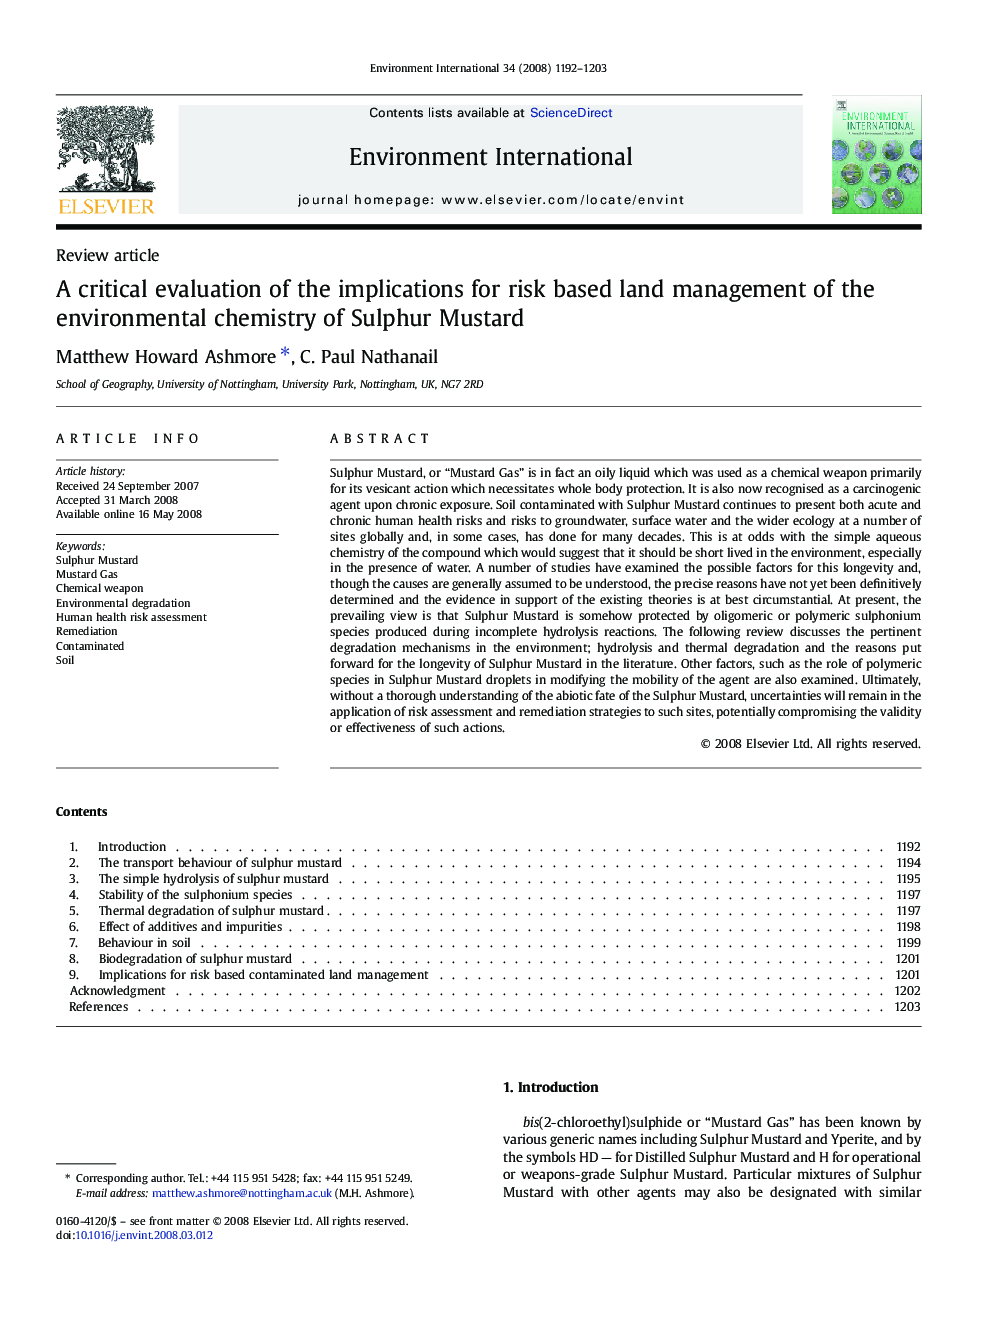 A critical evaluation of the implications for risk based land management of the environmental chemistry of Sulphur Mustard